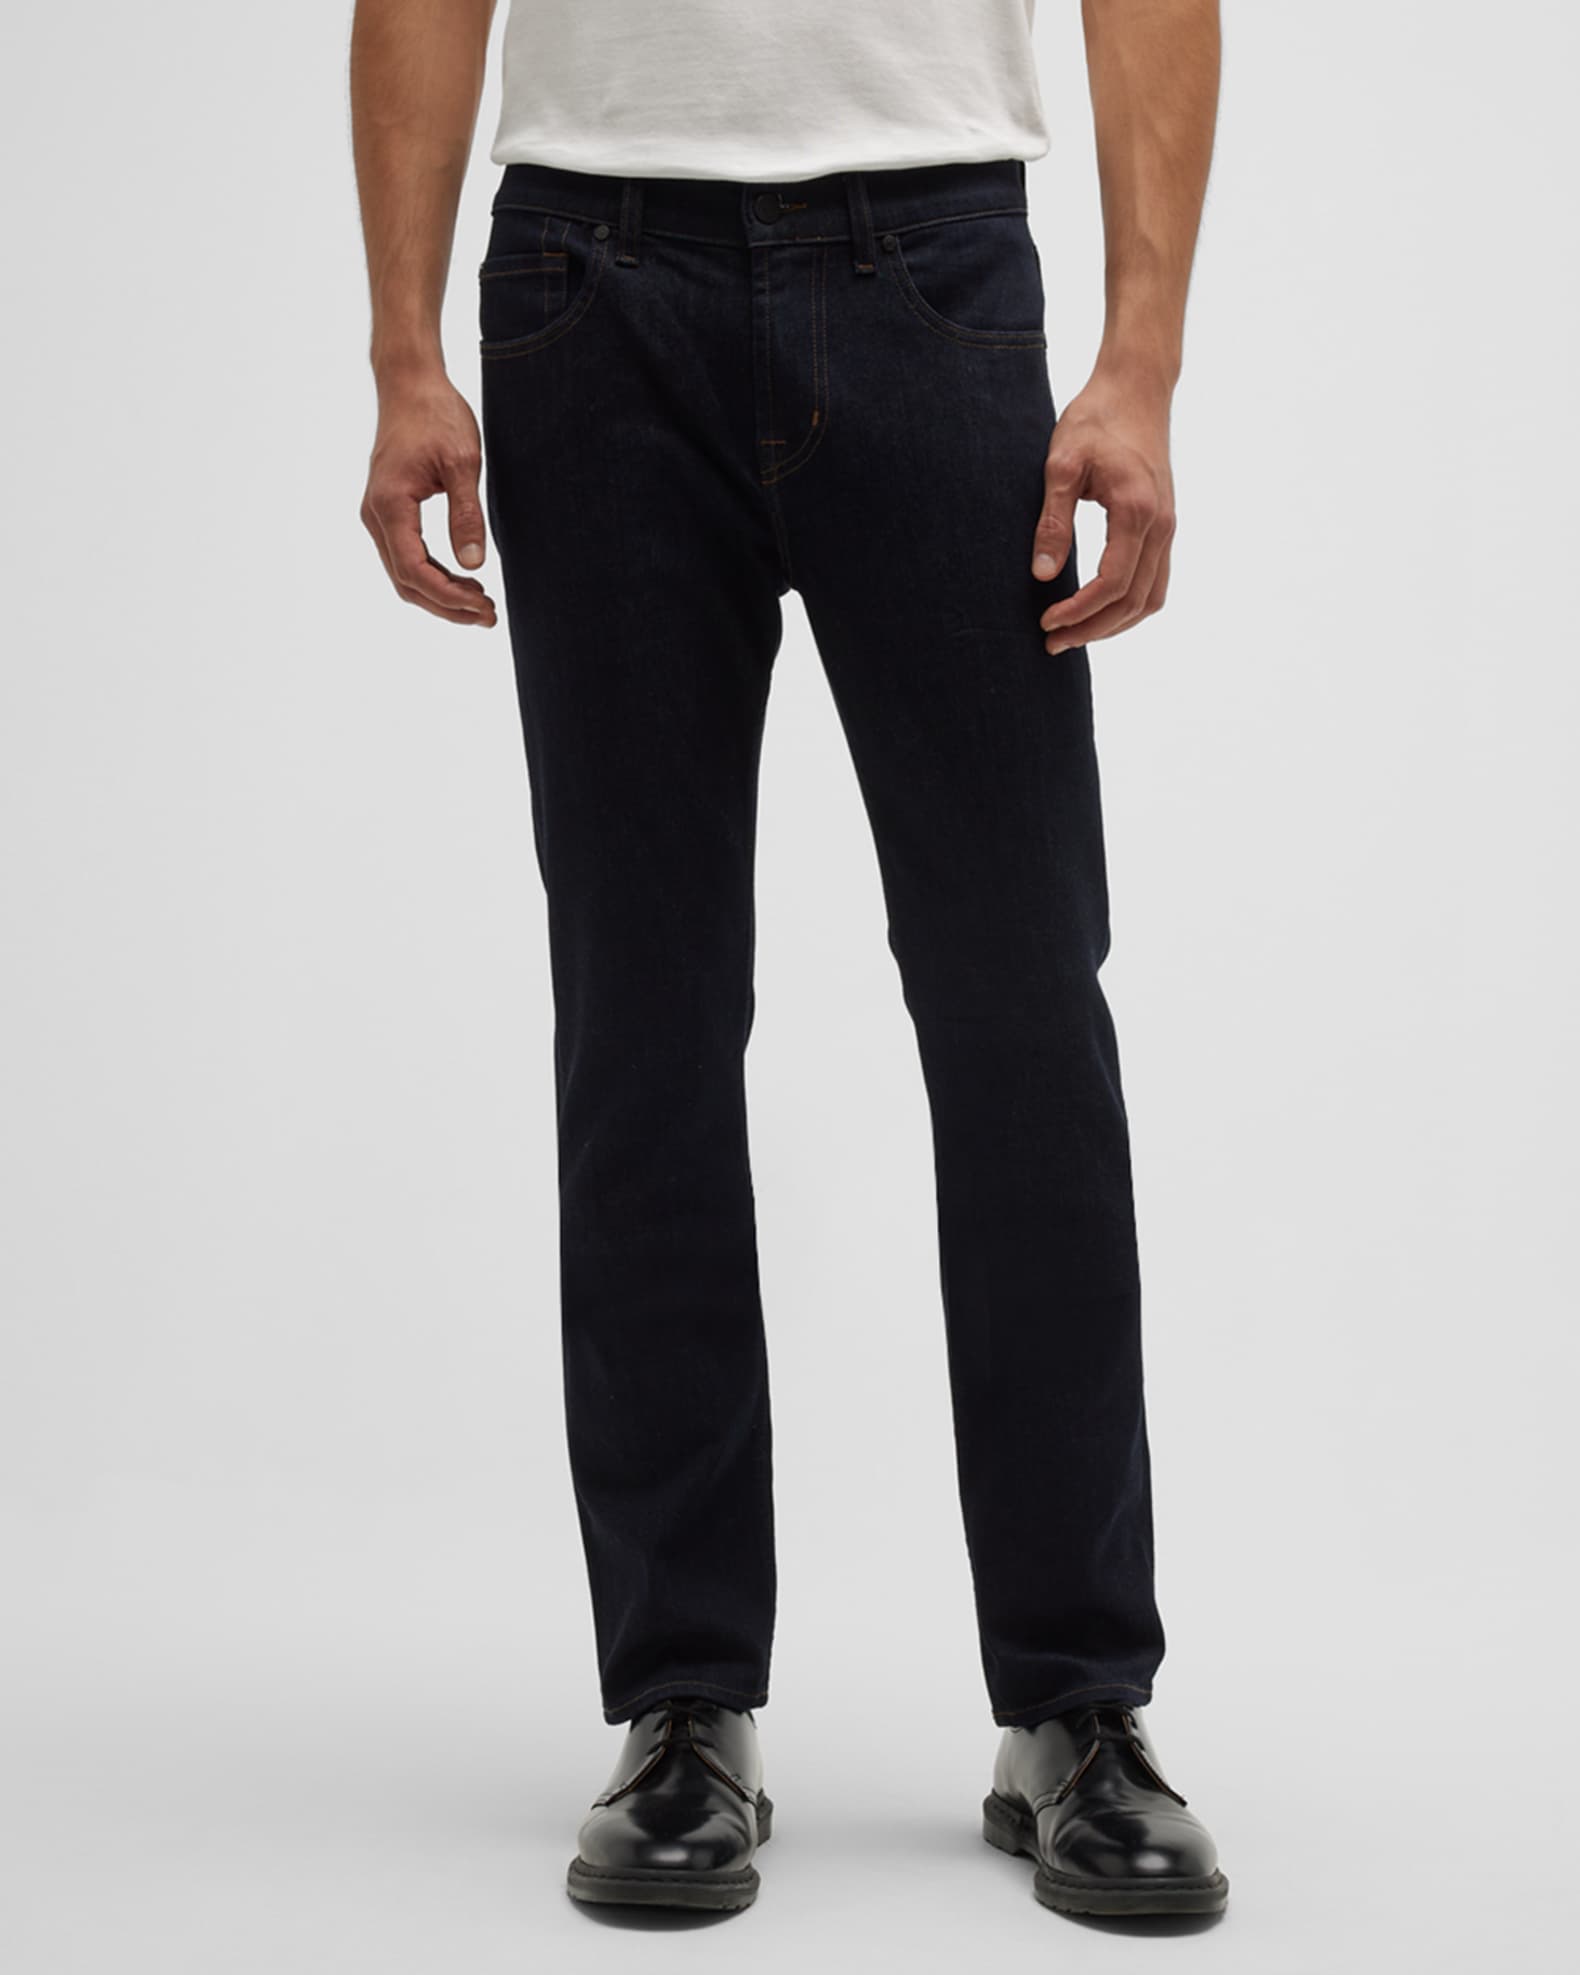 7 for all mankind Men's Luxe Performance Straight-Leg Jeans